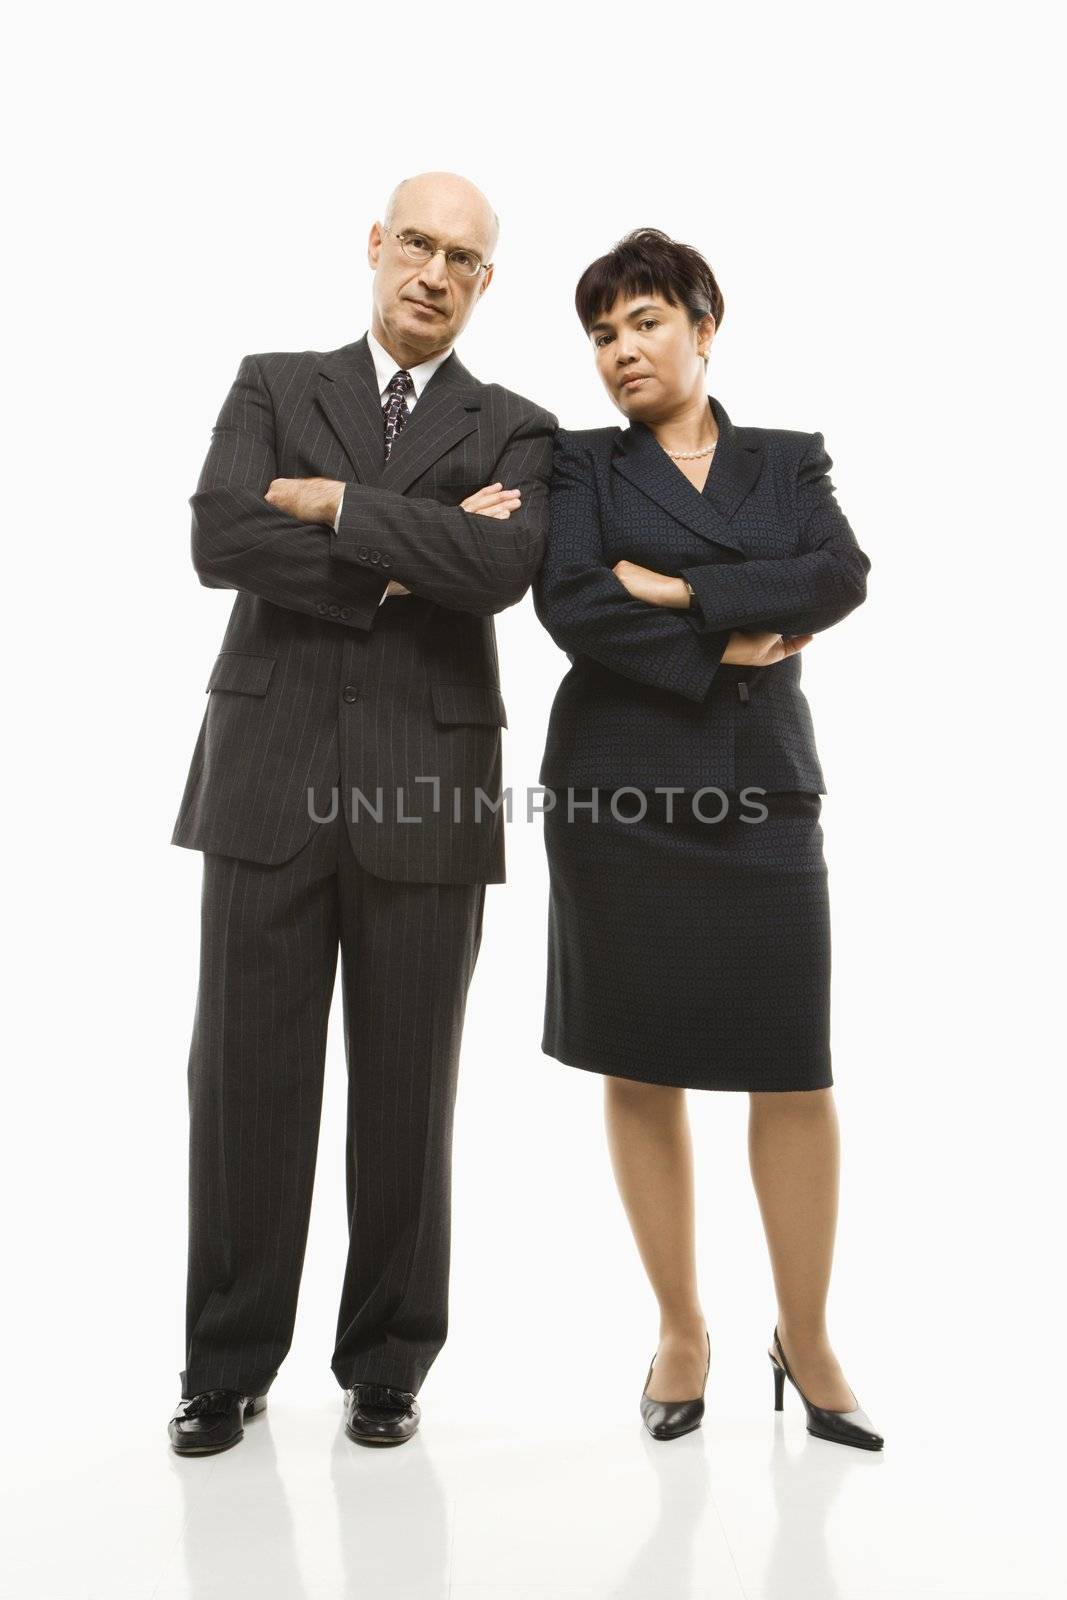 Caucasian middle-aged businessman and Filipino businesswoman standing with arms crossed against white background.